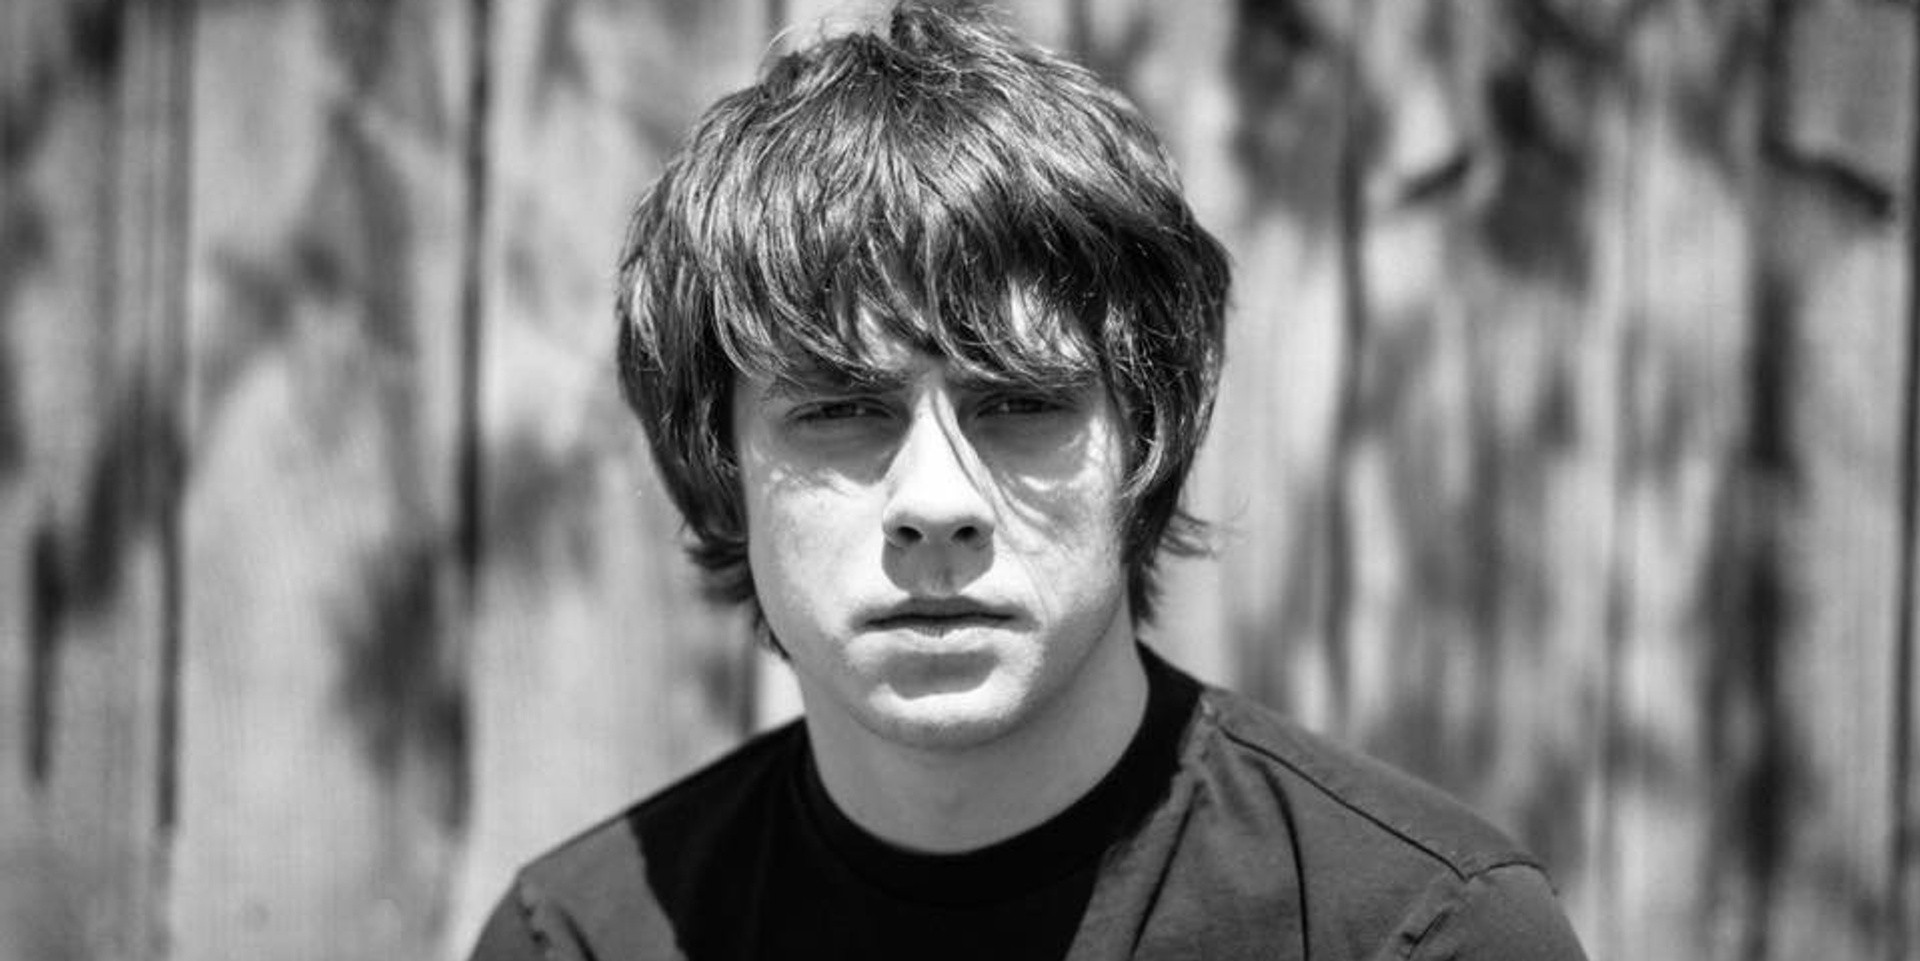 Jake Bugg on playing Glastonbury, dealing with Bob Dylan comparisons, working on new music and more